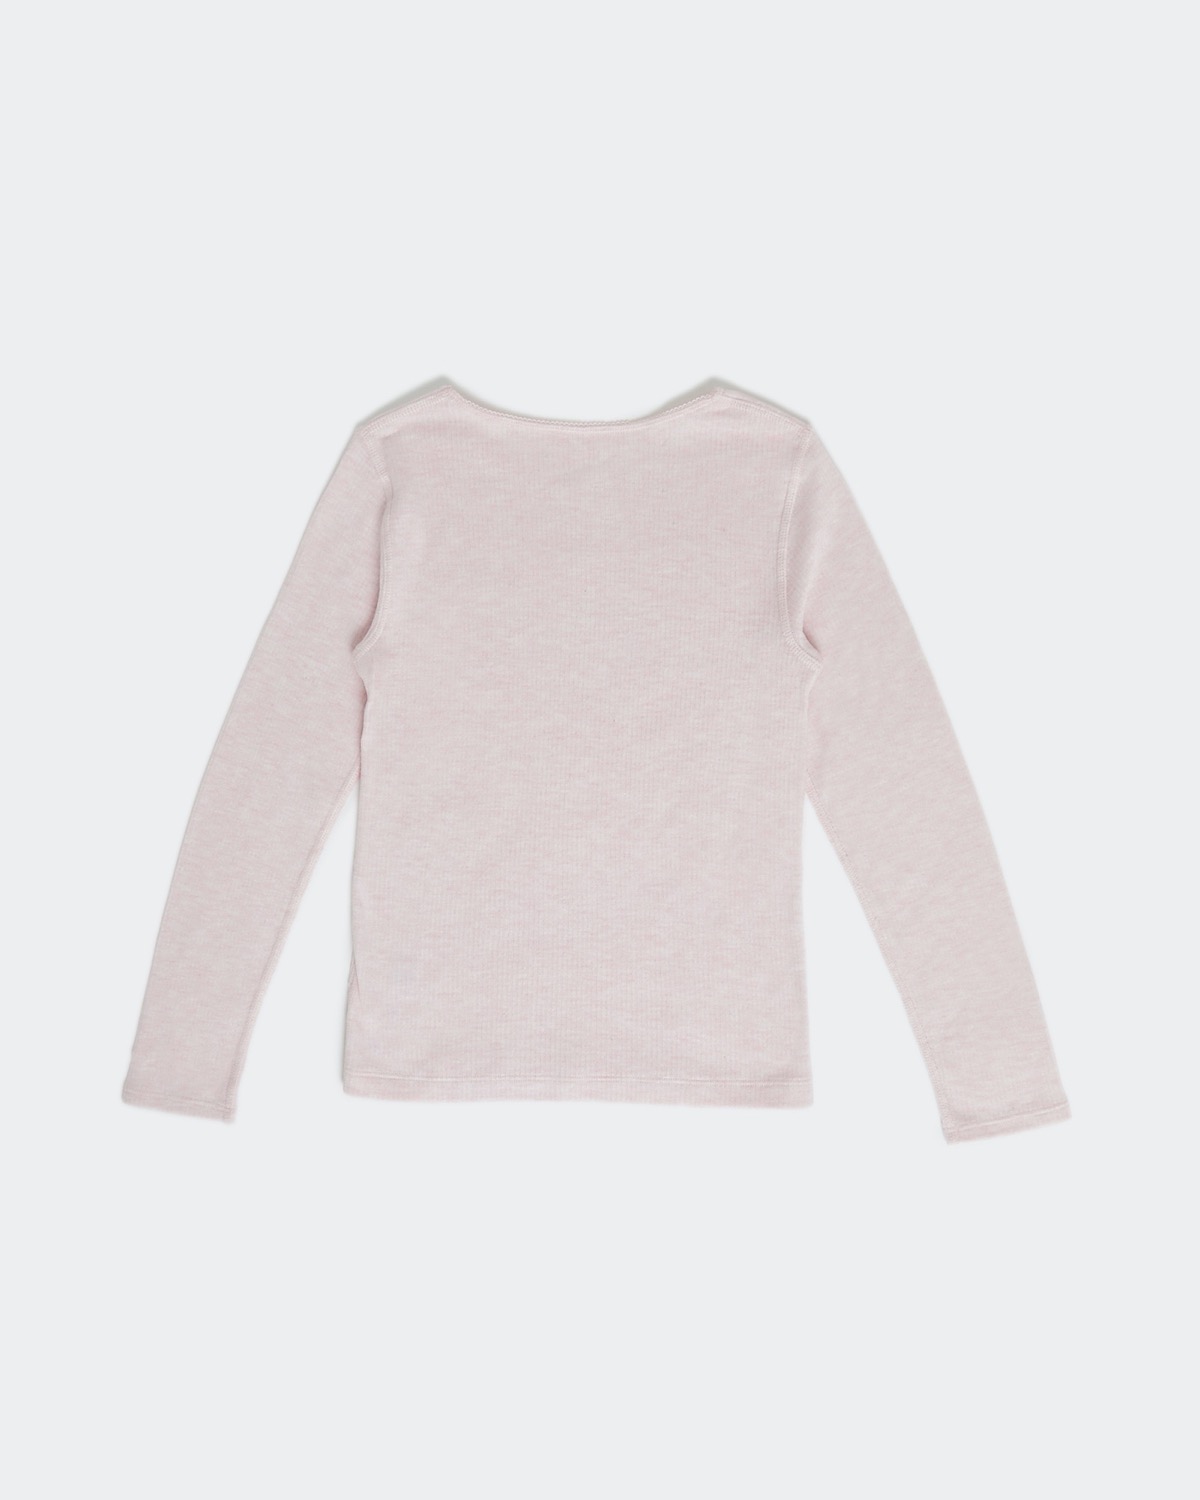 Girls Thermal Long-Sleeved Tops - Pack Of 2 (2-14 Years)